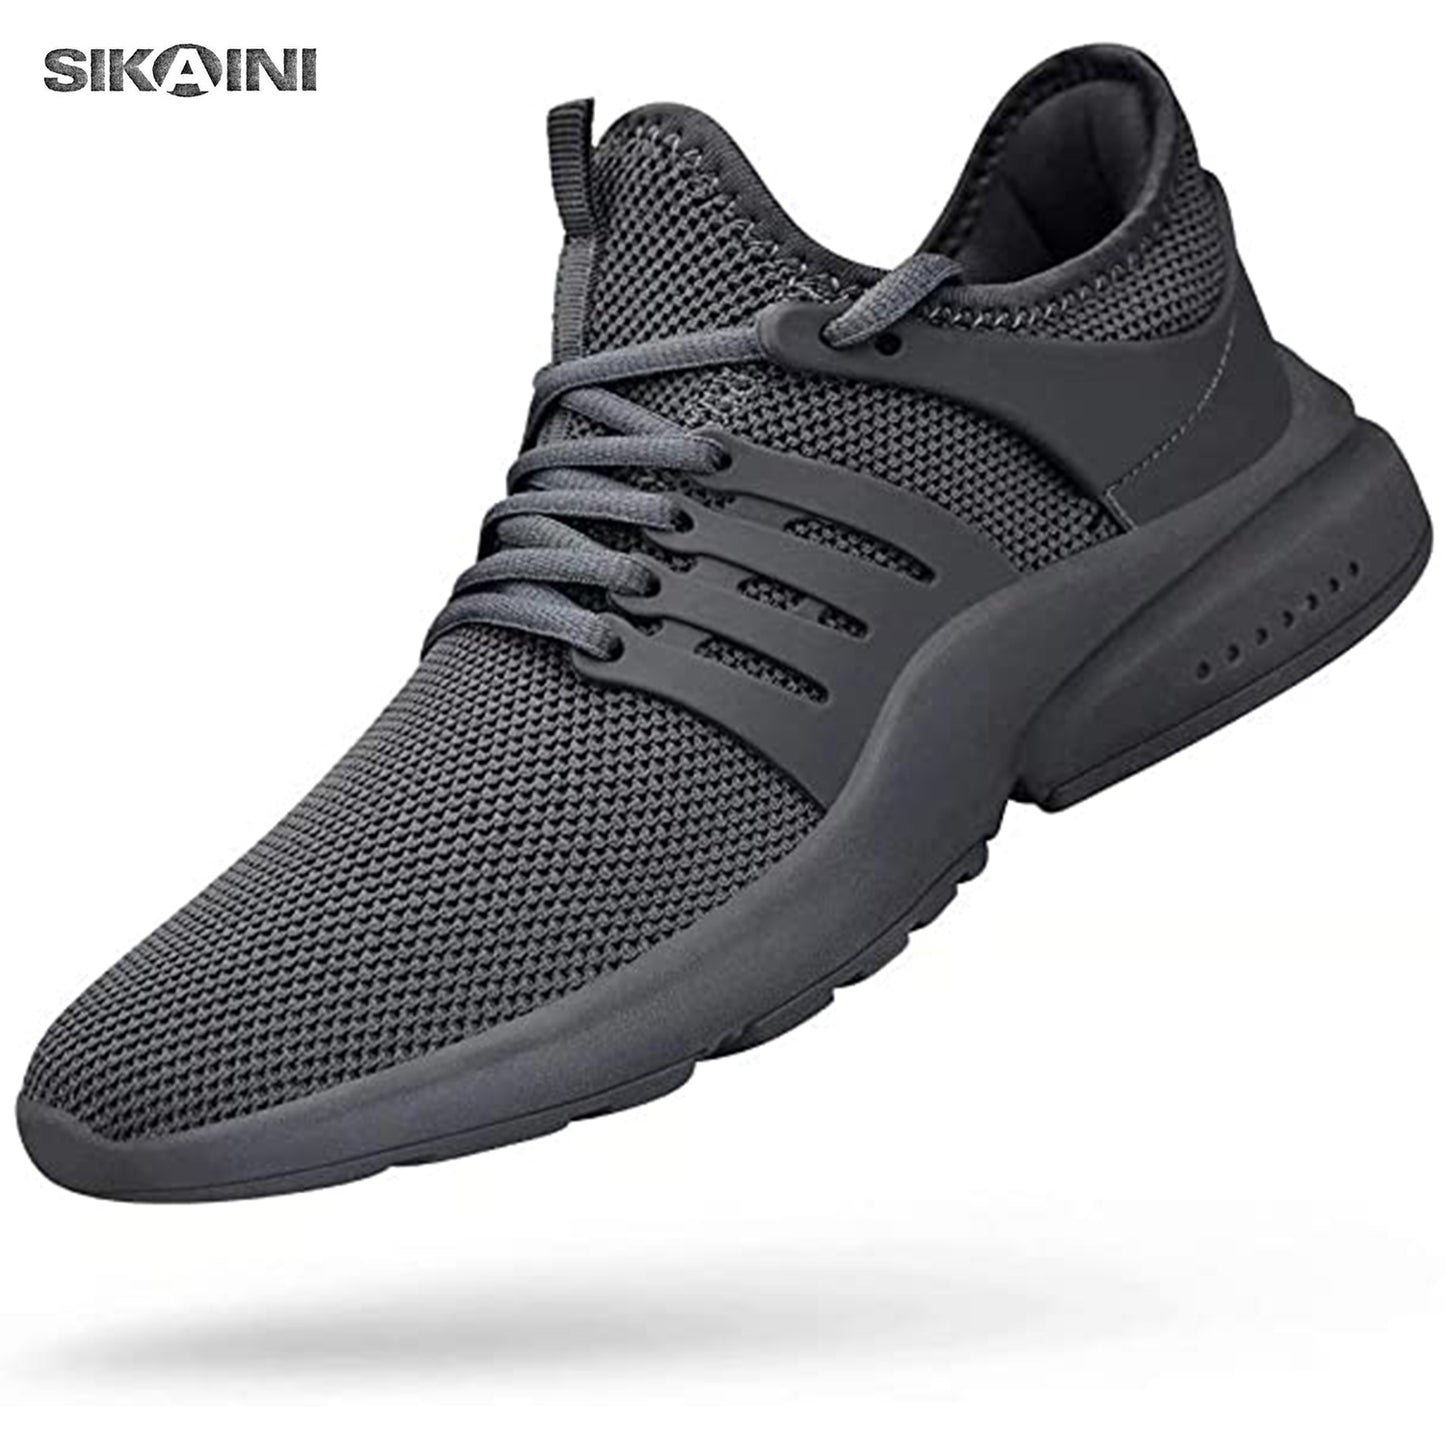 SIKAINI Men's Running Shoes Non-Slip Shoes Breathable Lightweight Sneakers